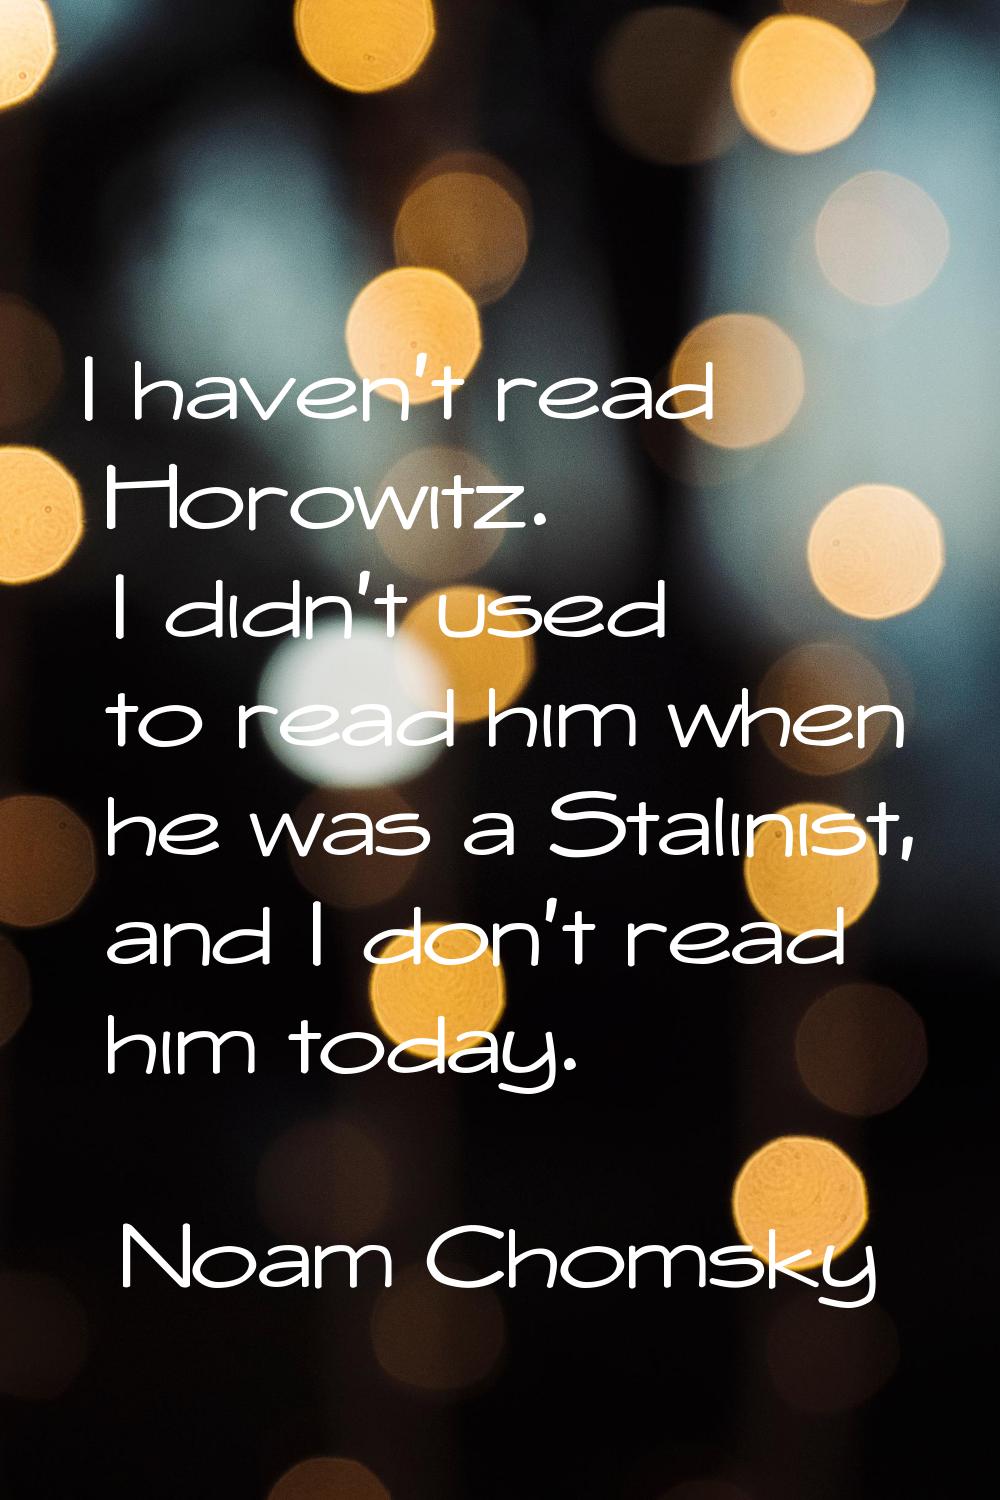 I haven't read Horowitz. I didn't used to read him when he was a Stalinist, and I don't read him to